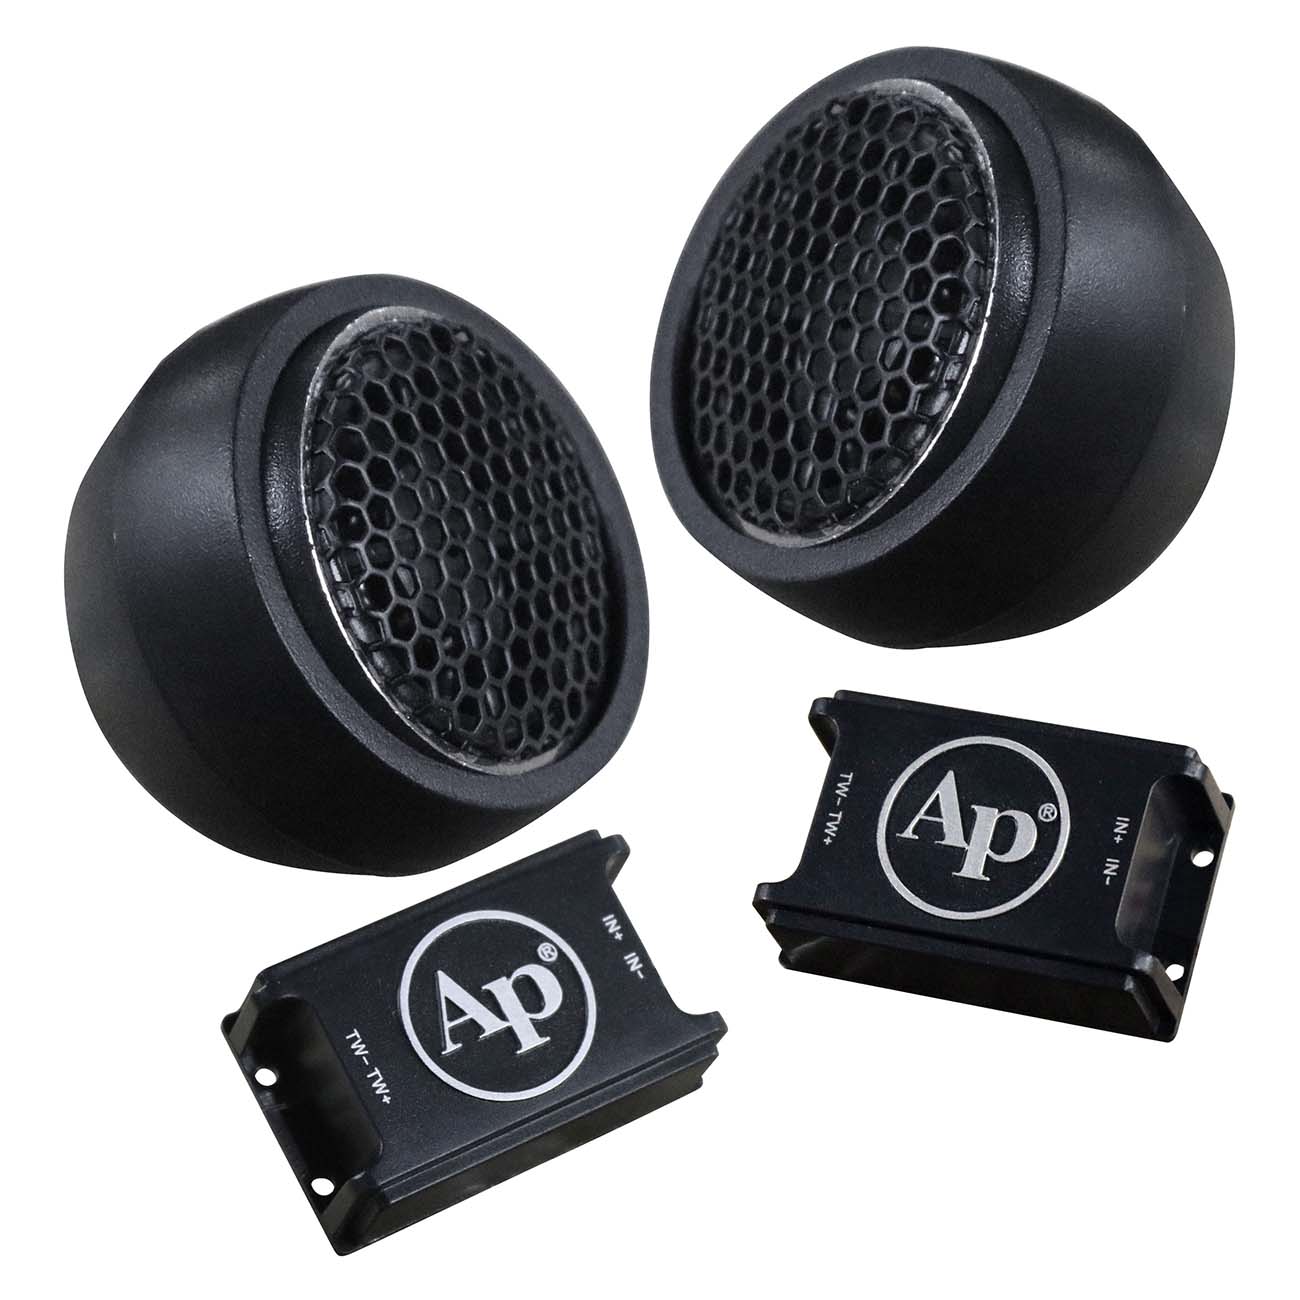 Audiopipe 1/2" Swivel Tweeter Pair 80 Watts Max Surface & Angle Mounting 4ohm